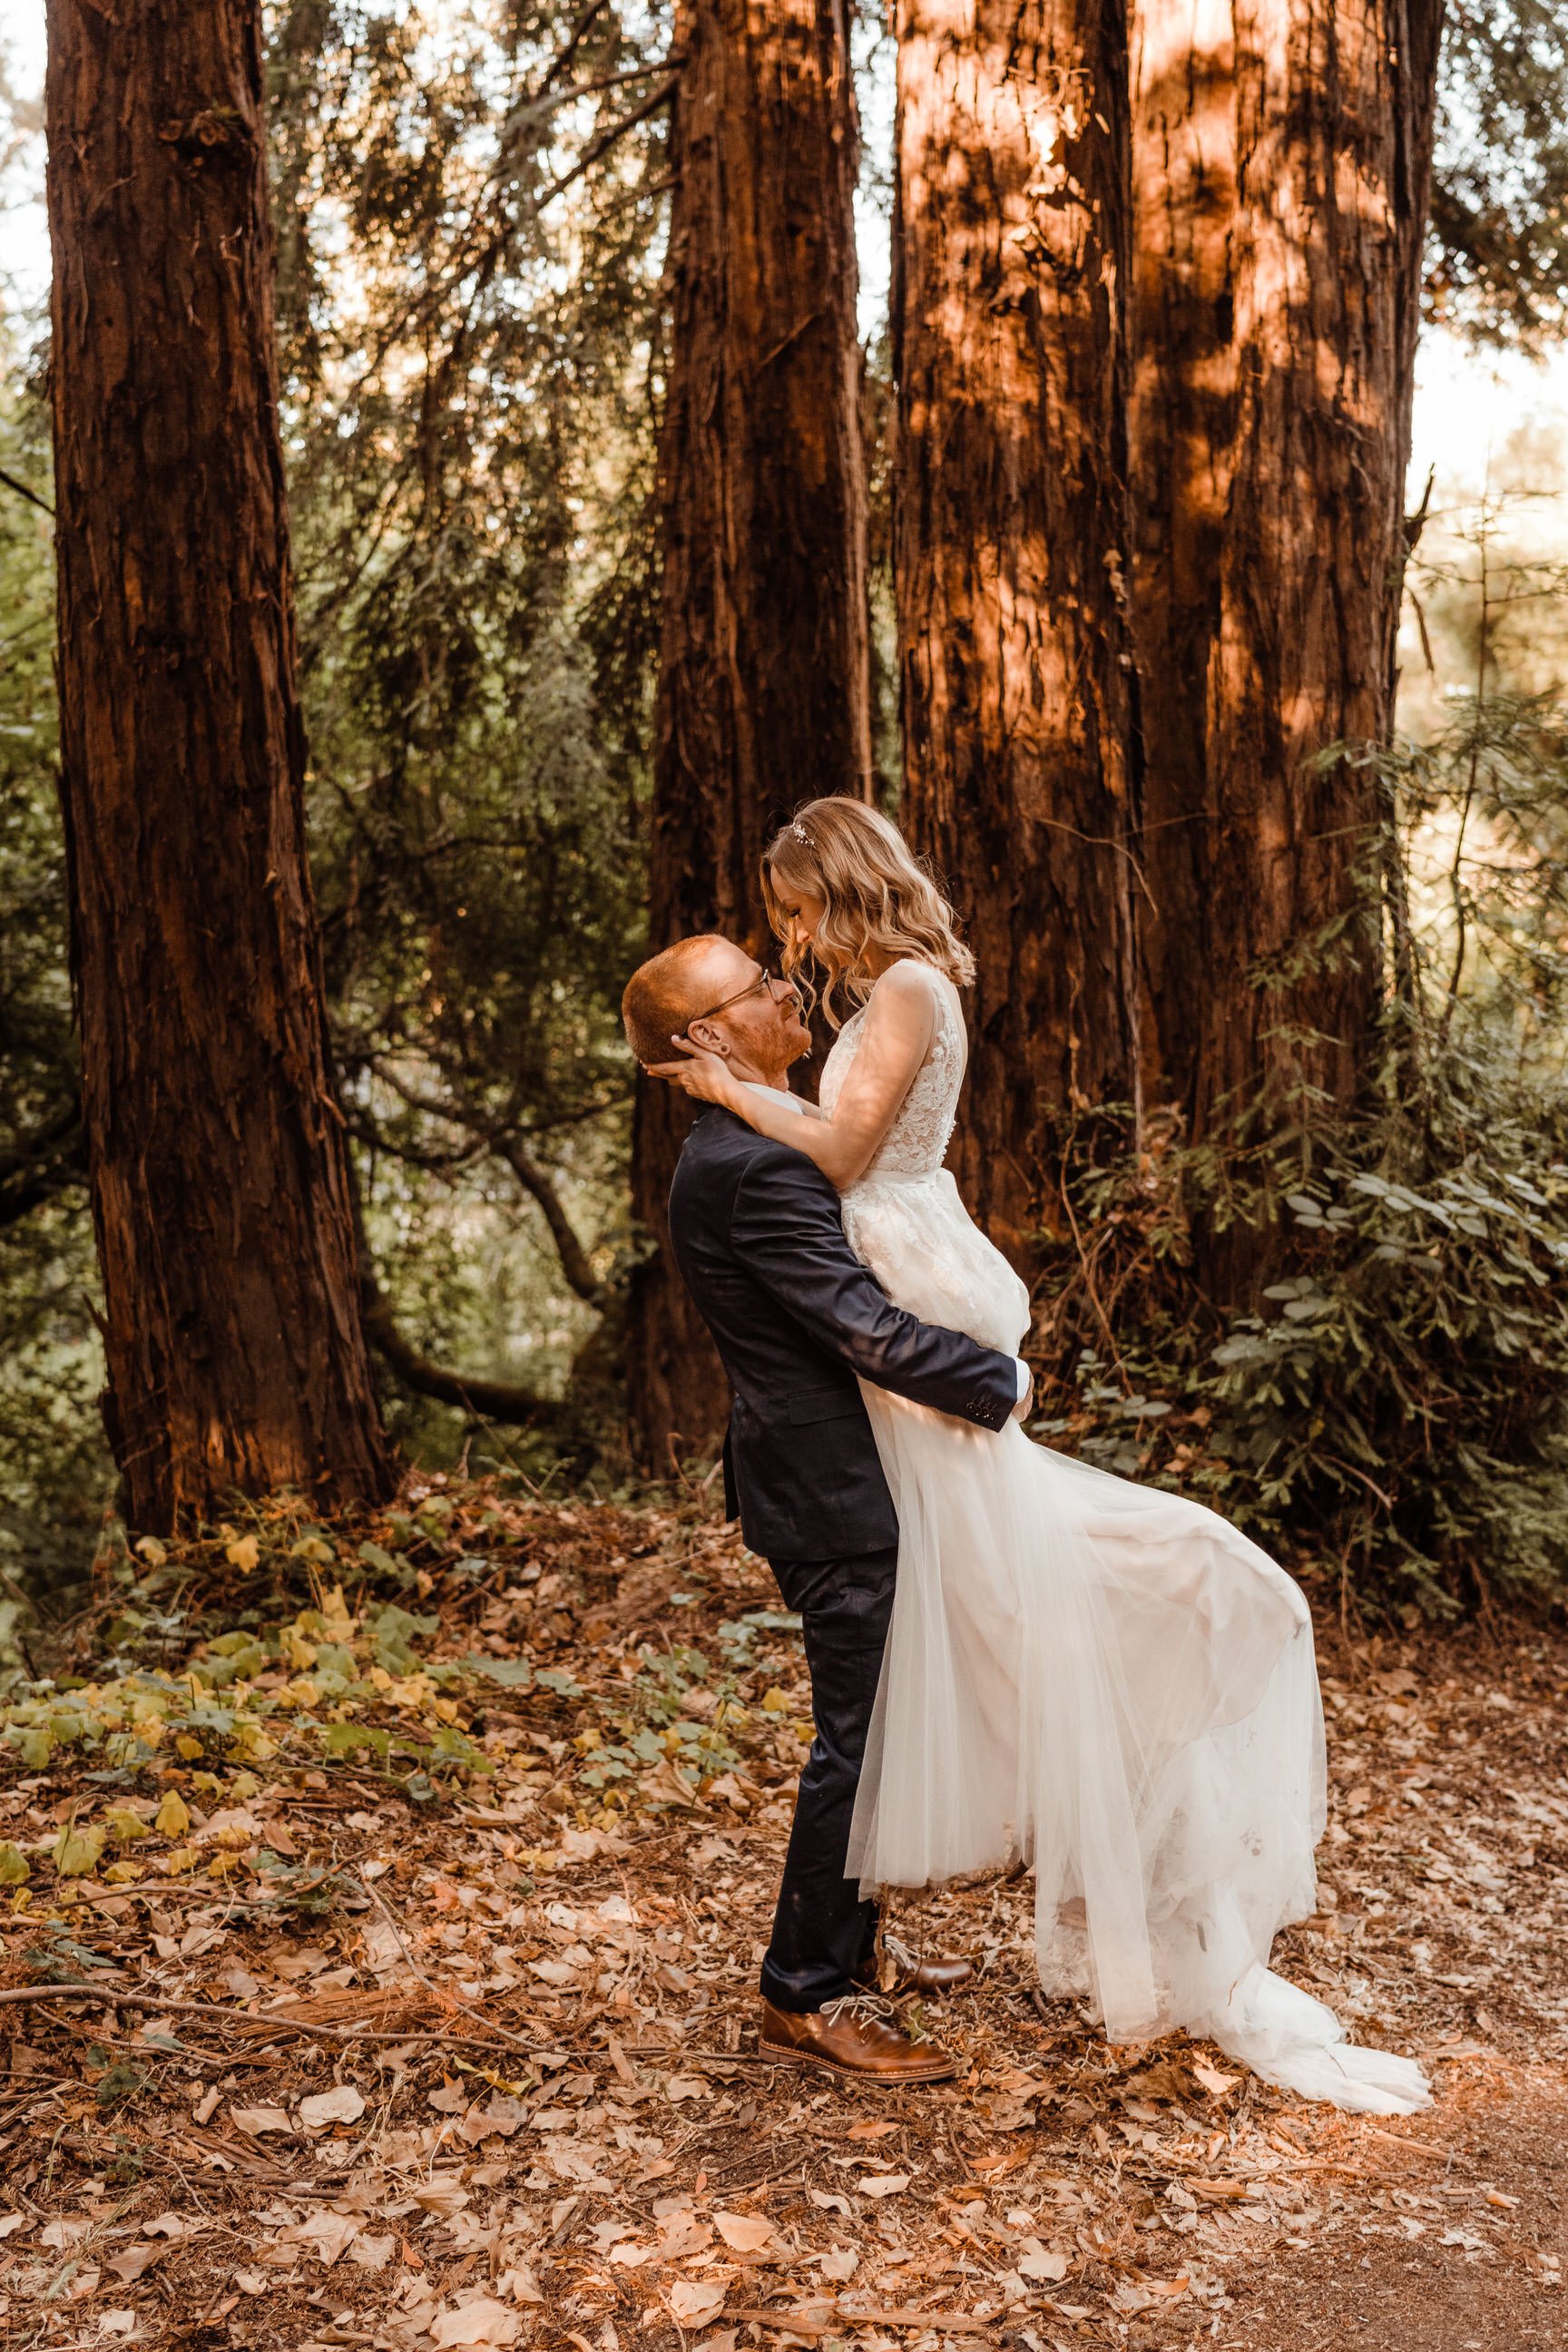 Wedding-in-the-Woods-Bride-and-Groom-Sunlit-Pictures-Beneath-Redwood-Forest (3).jpg